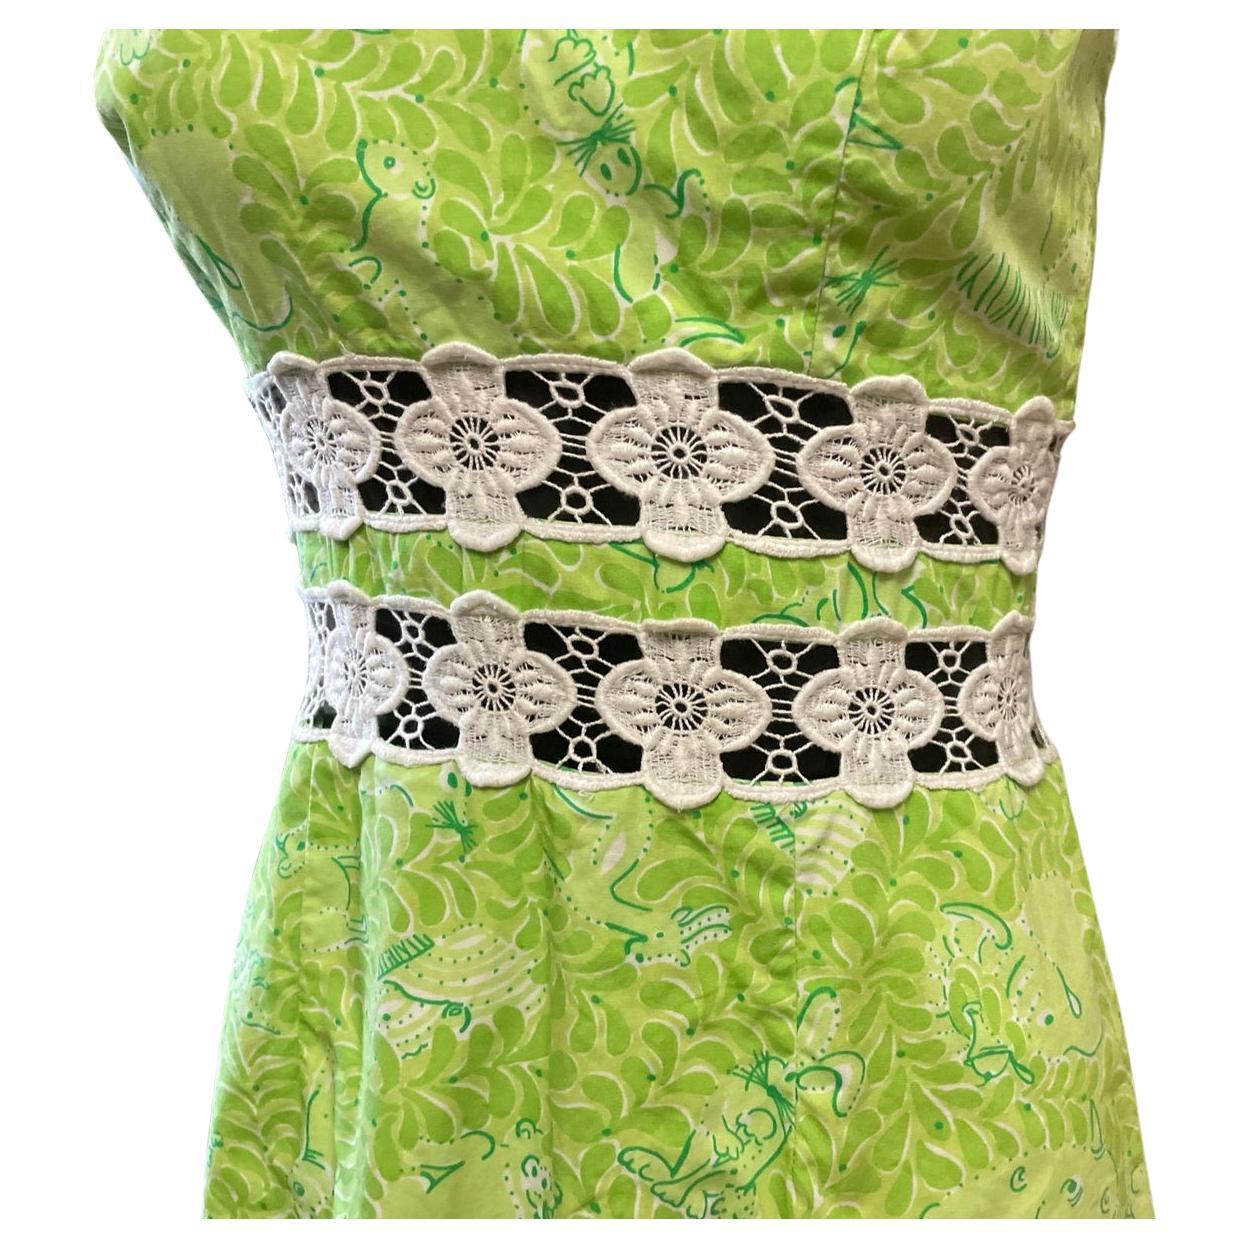 Lilly Pulitzer Lime Green Mini Dress, Circa 1990s For Sale 1